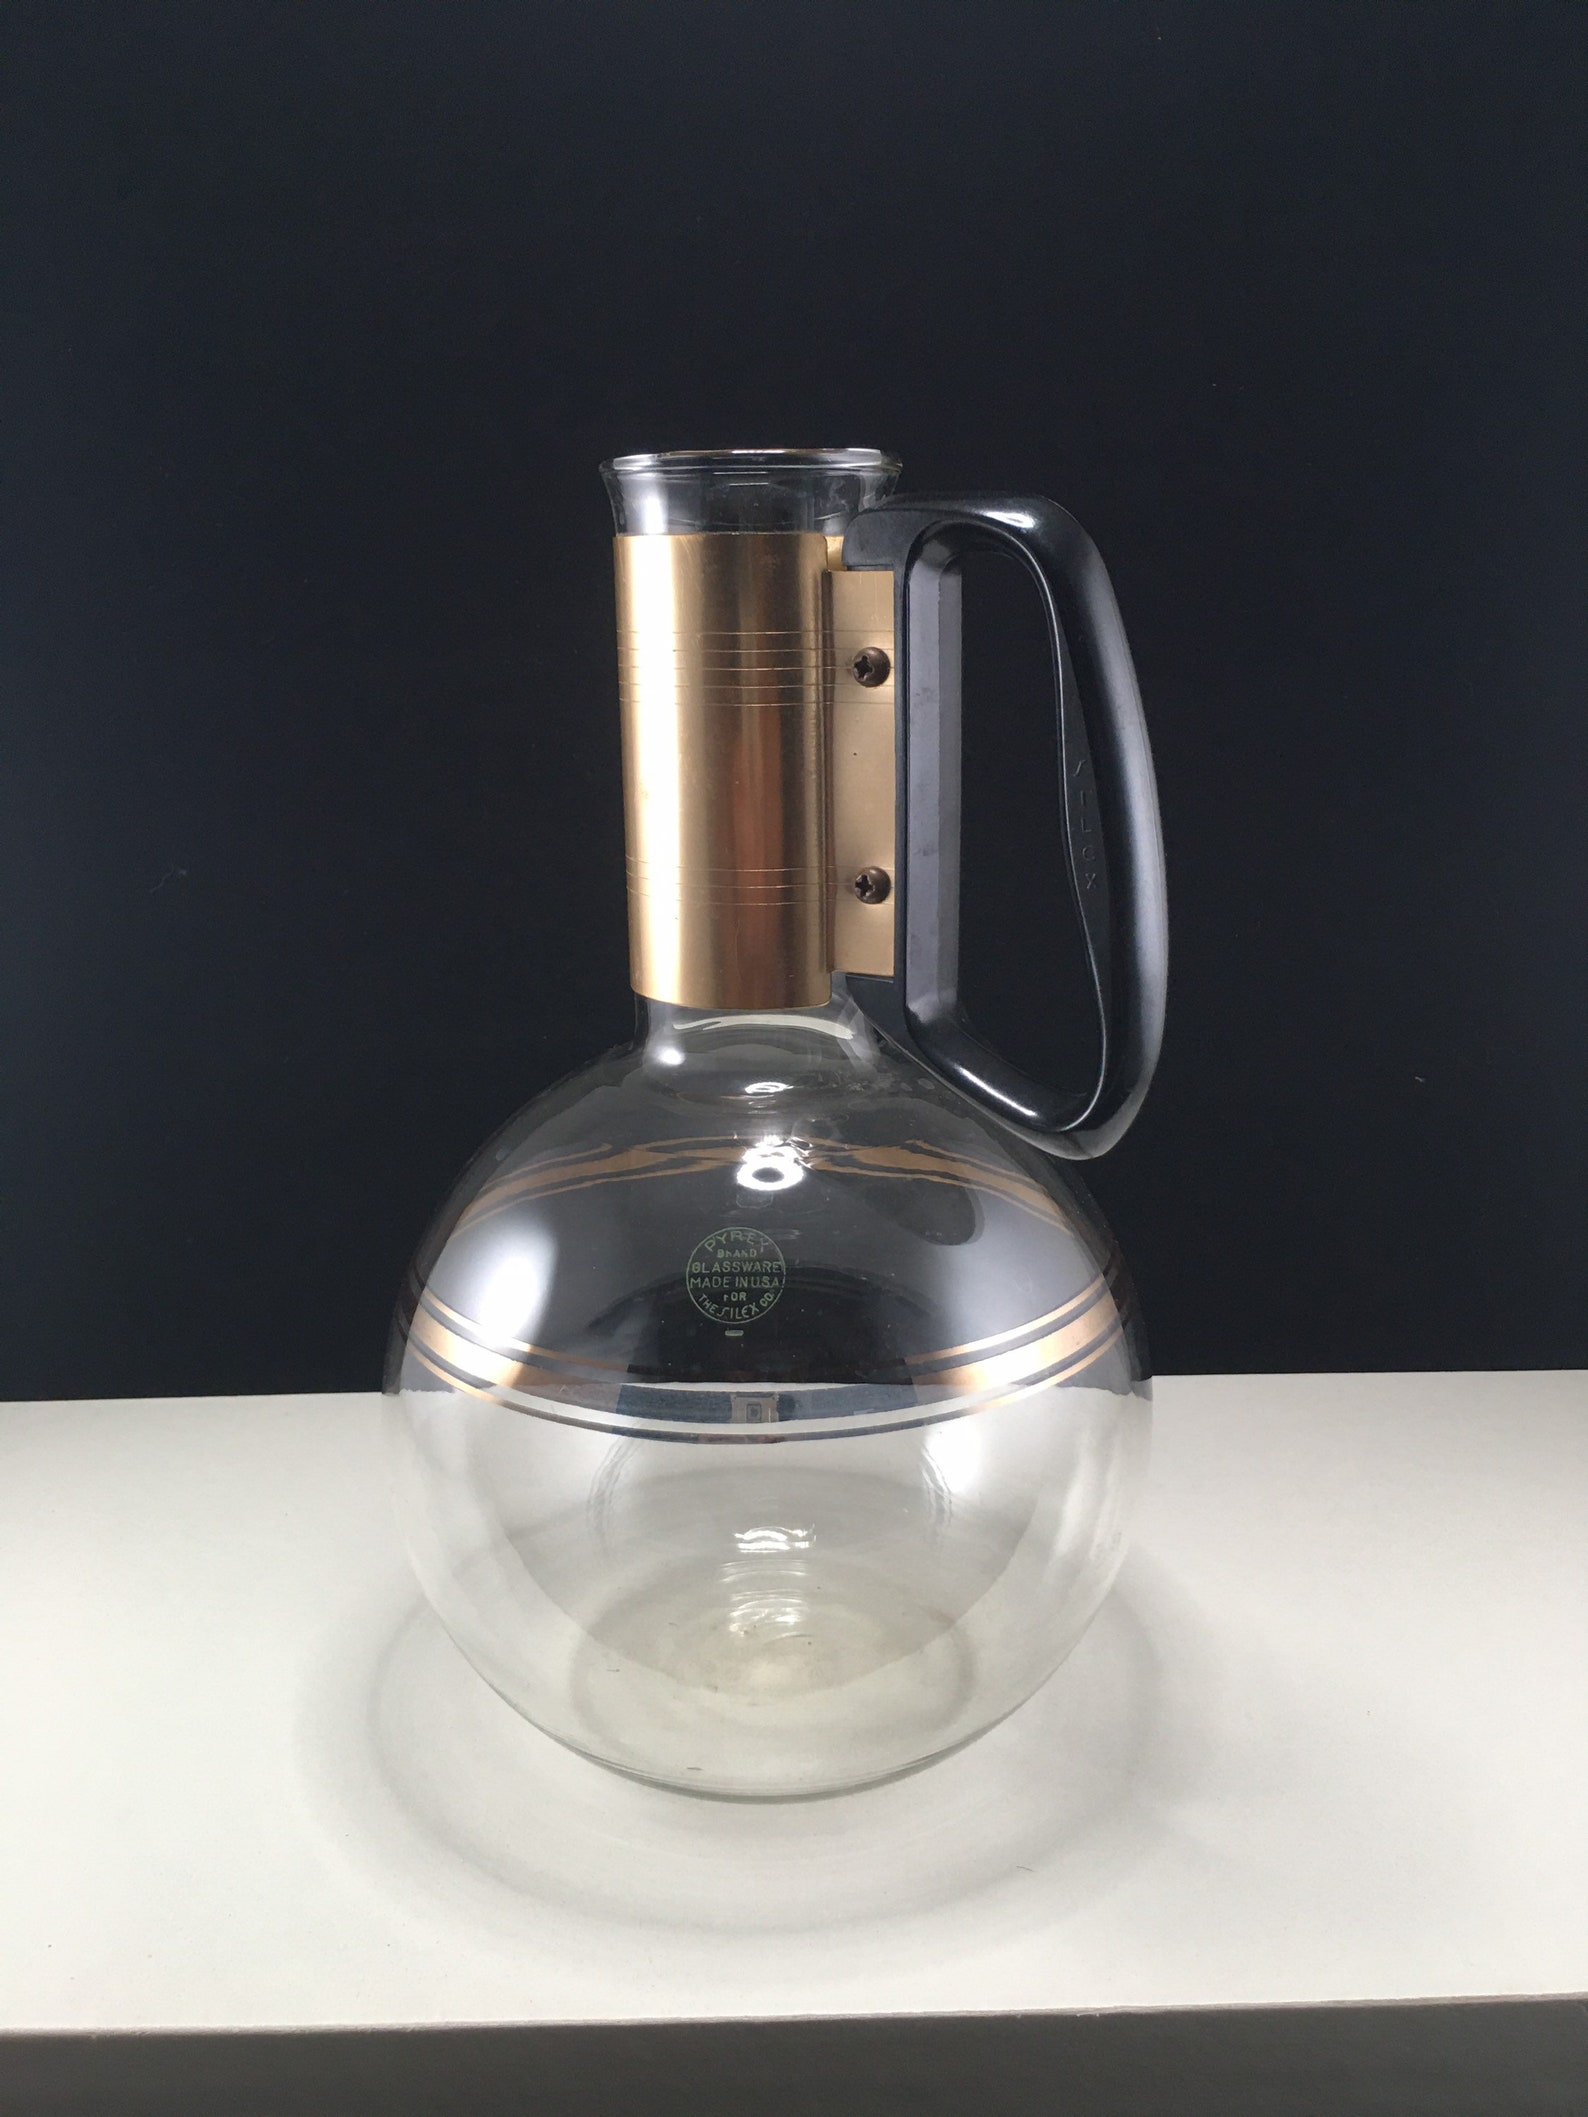 Vintage 1950s Pyrex Silex Coffee Carafe Gold Accents 12 Cup Etsy